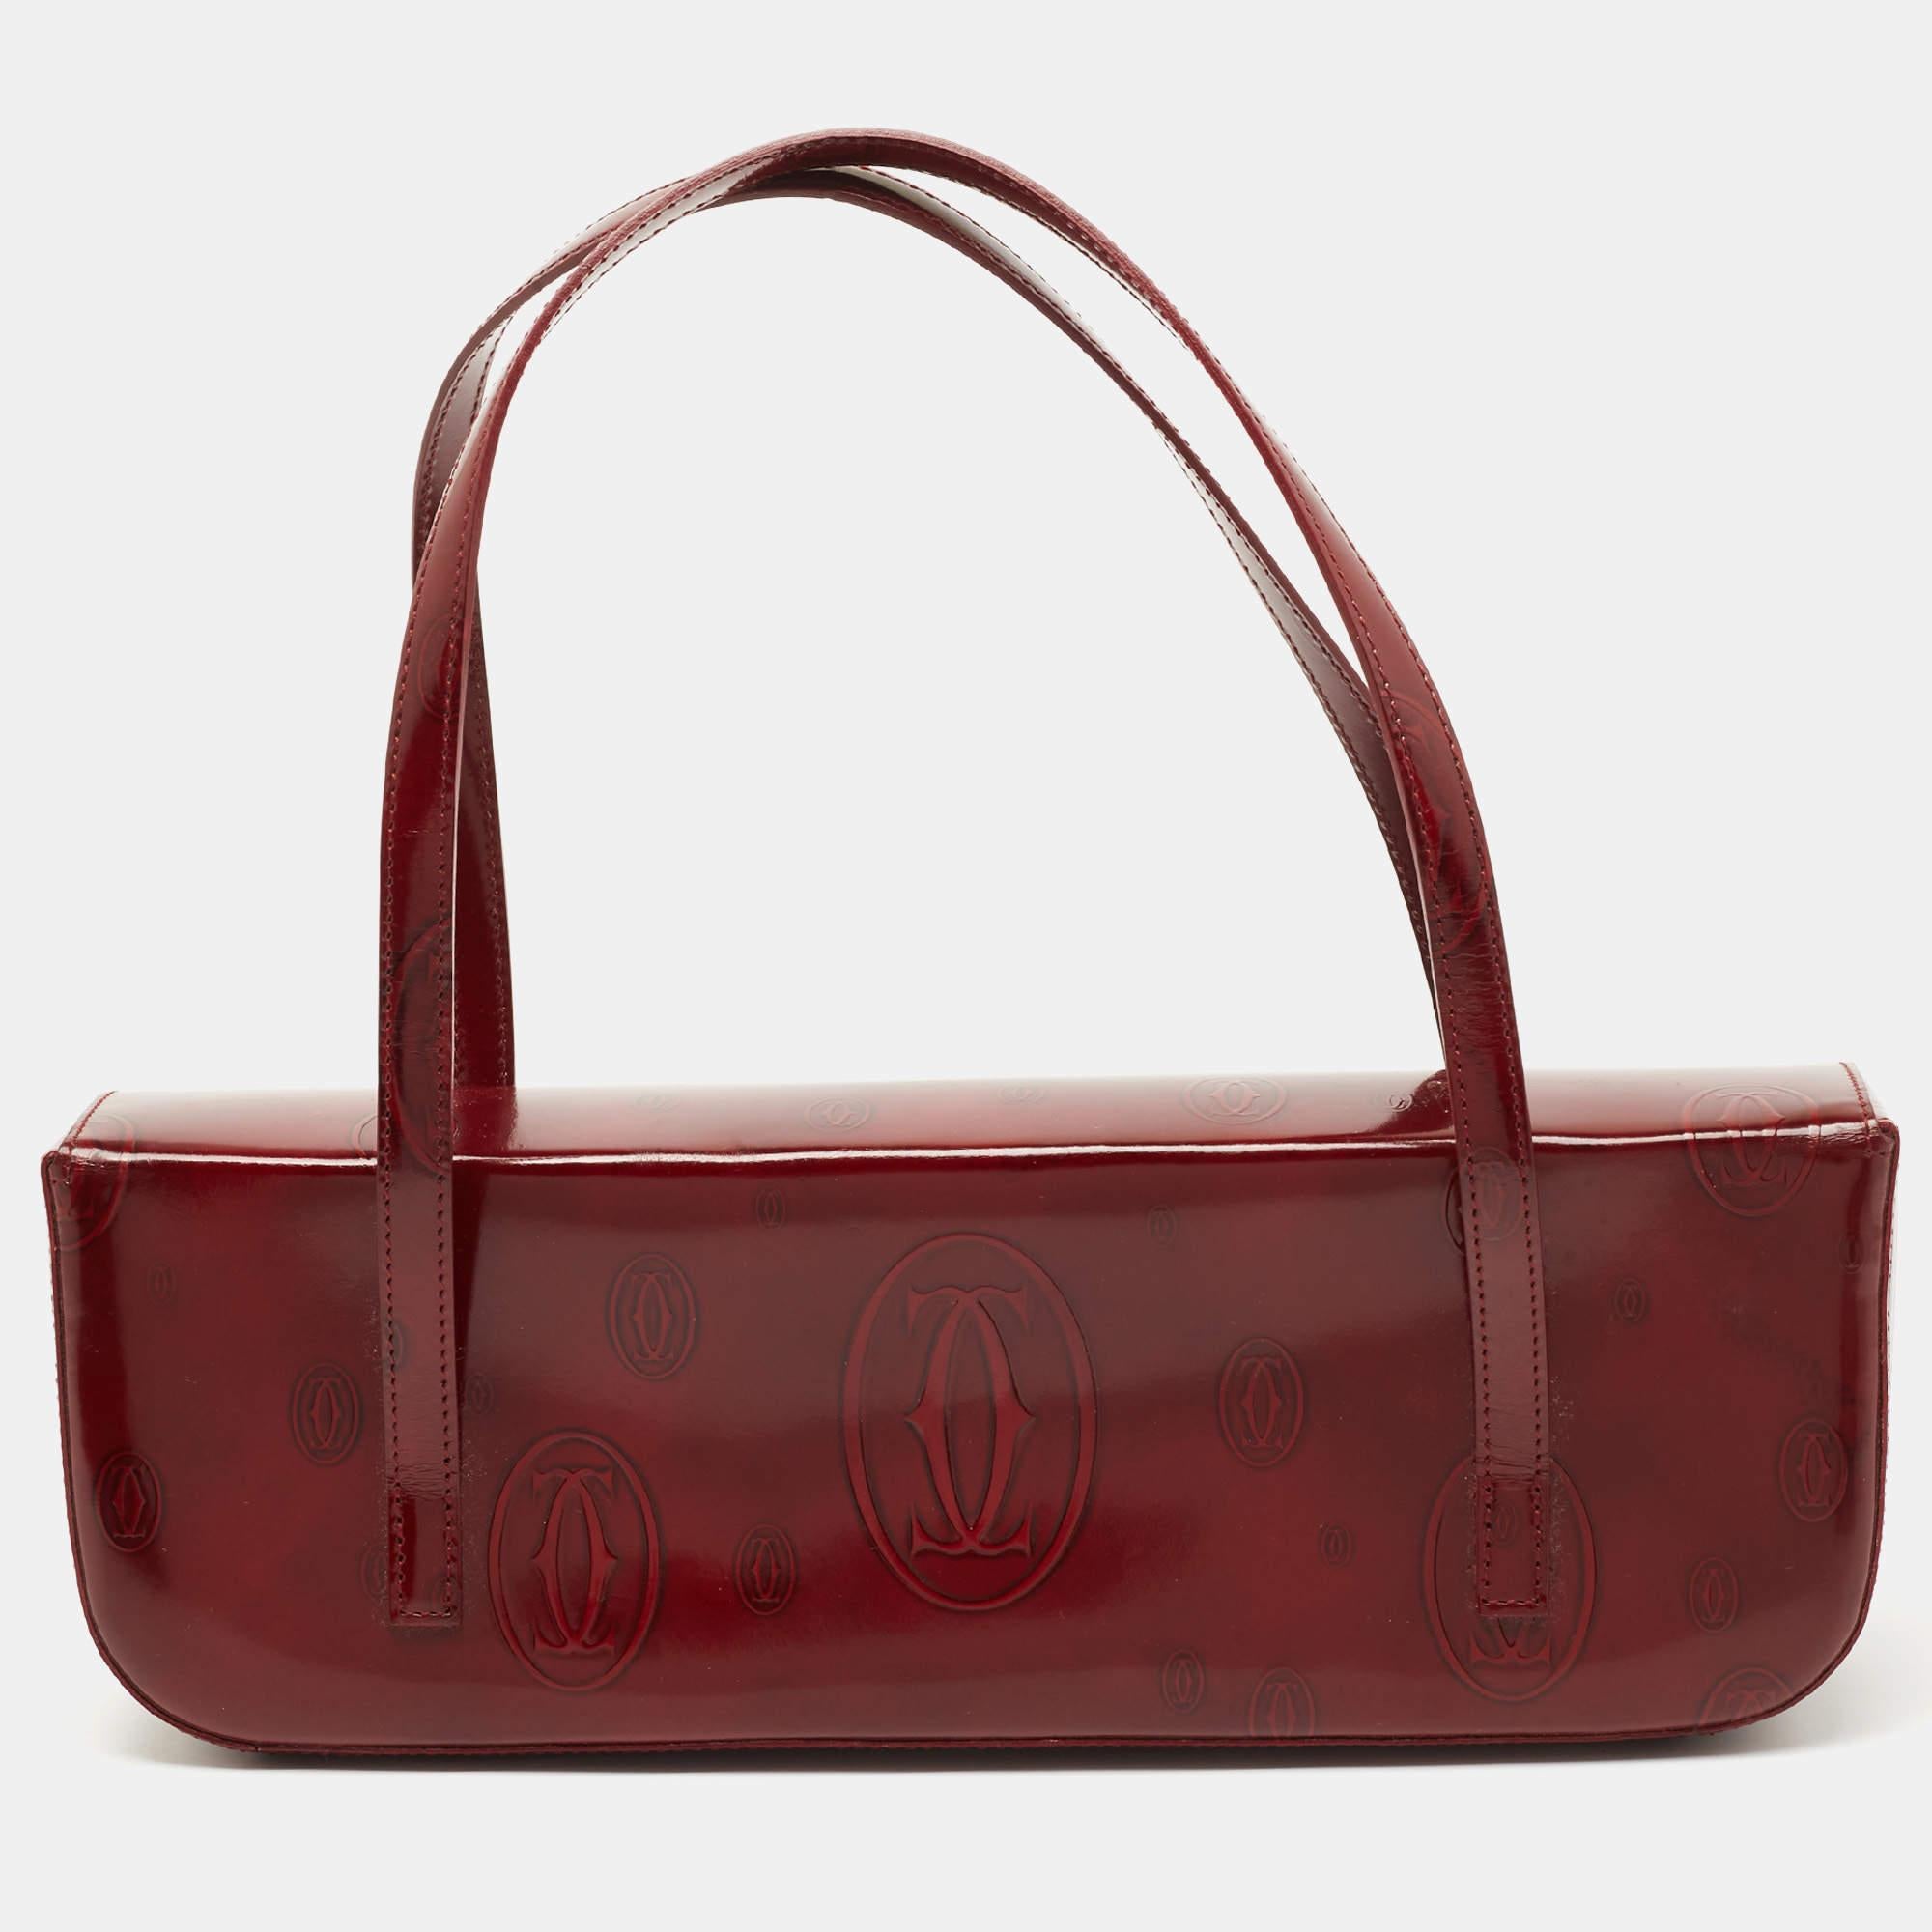 Show your love for Cartier with this shoulder bag from Cartier’s Happy Birthday Collection. This bag is crafted from glossy leather and features a petite silhouette and dual handles. The interior is lined with fabric.

